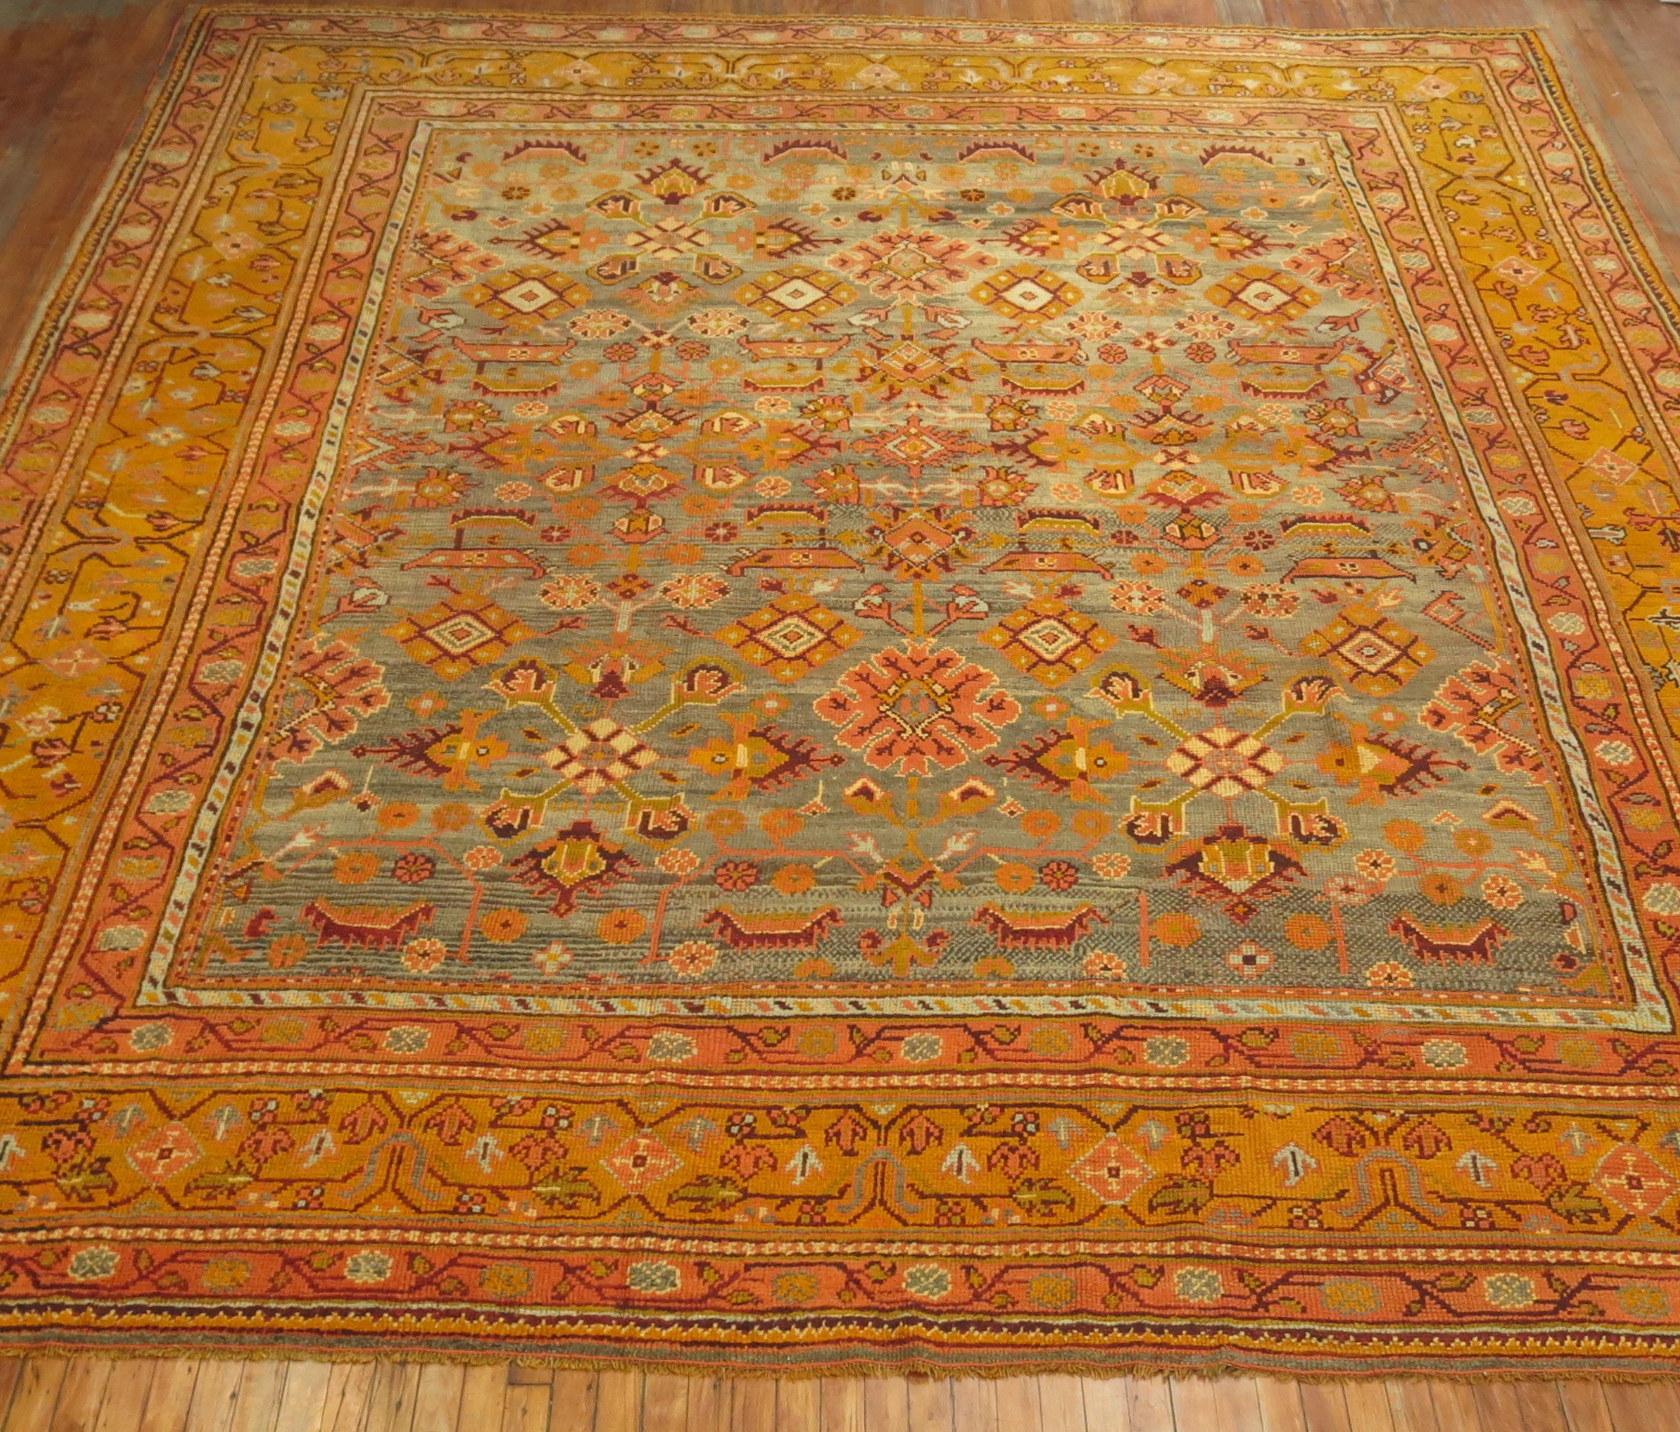 An early 20th century square size antique Turkish Oushak featuring an-all over design in bright saturated colors.

Oushak rugs originated in the small town of Oushak in west-central Anatolia, today just south of Istanbul, Turkey. Unlike most